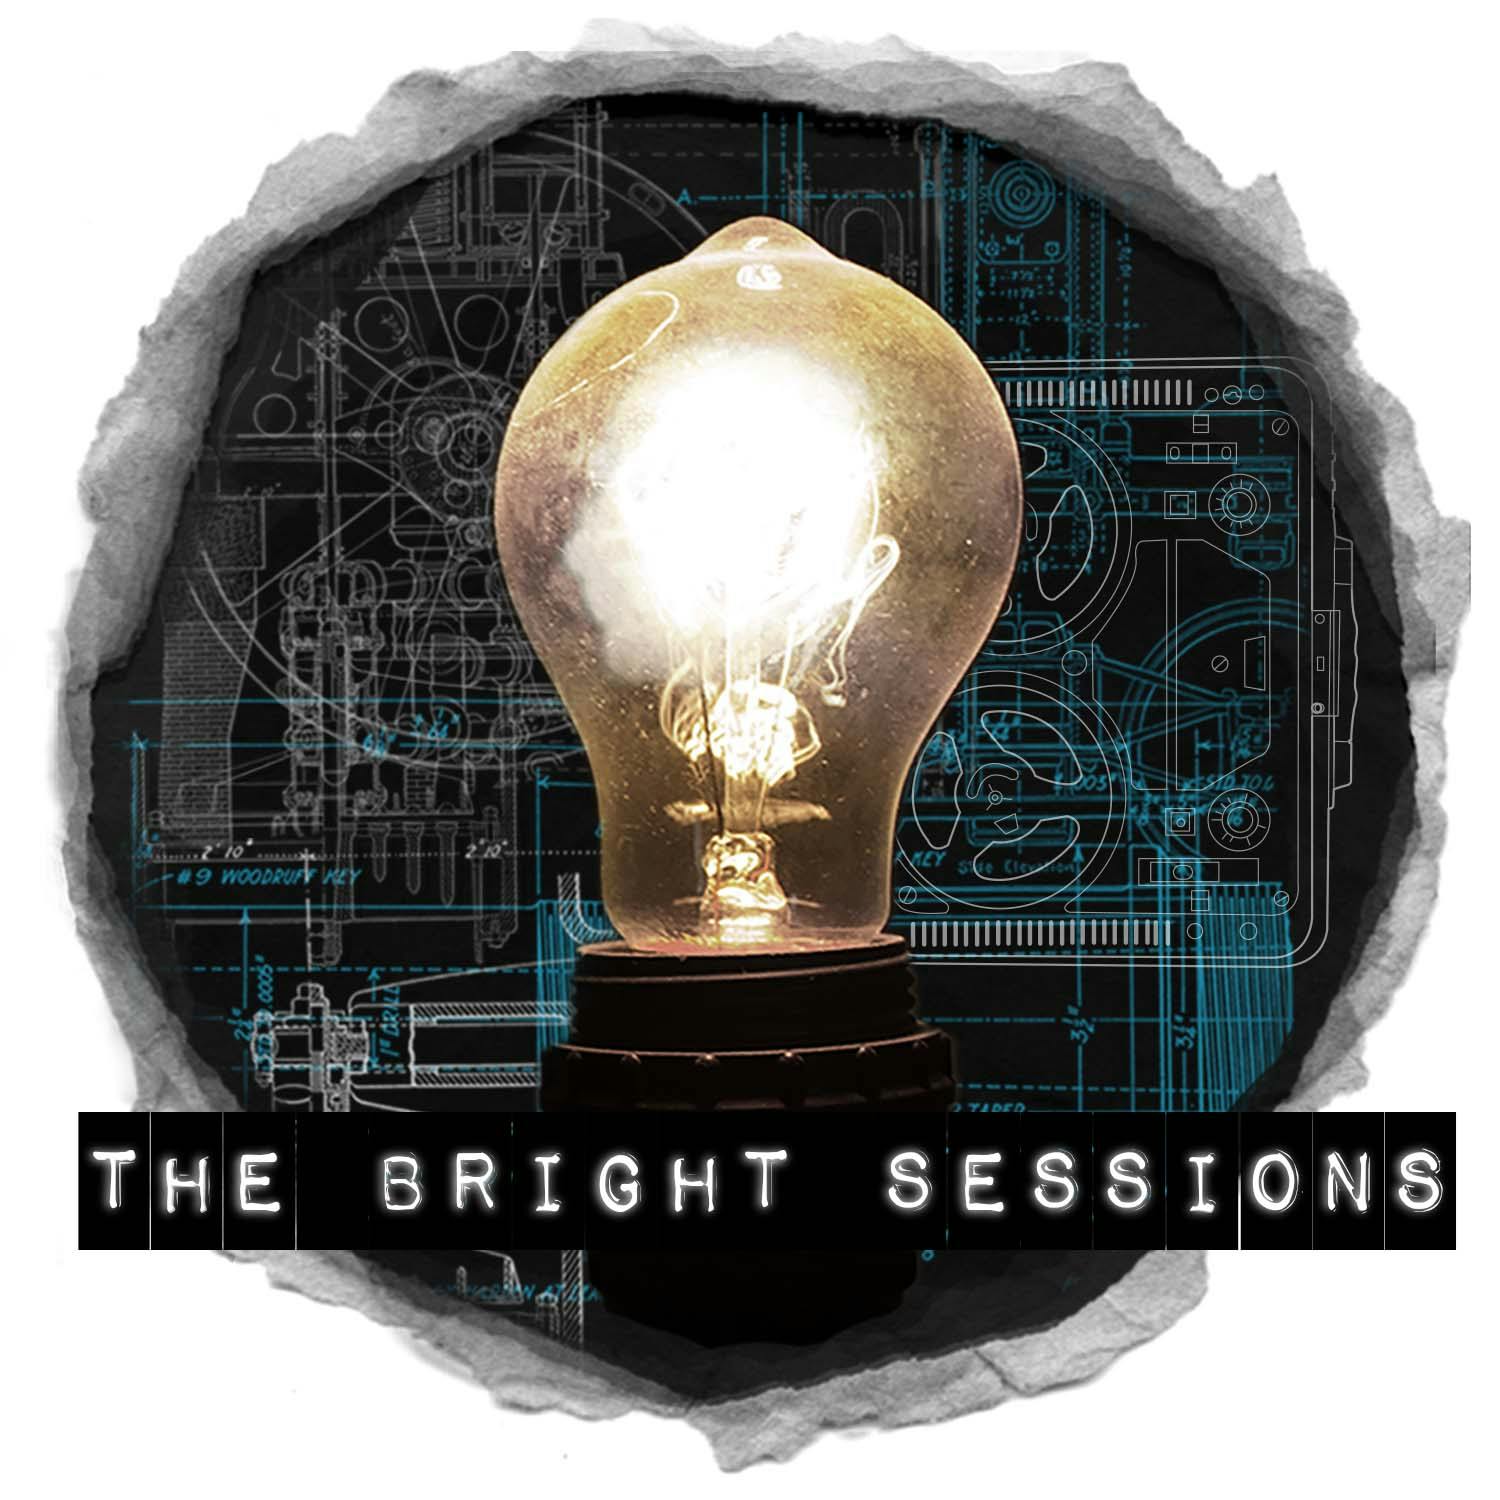 The Bright Sessions podcast show image